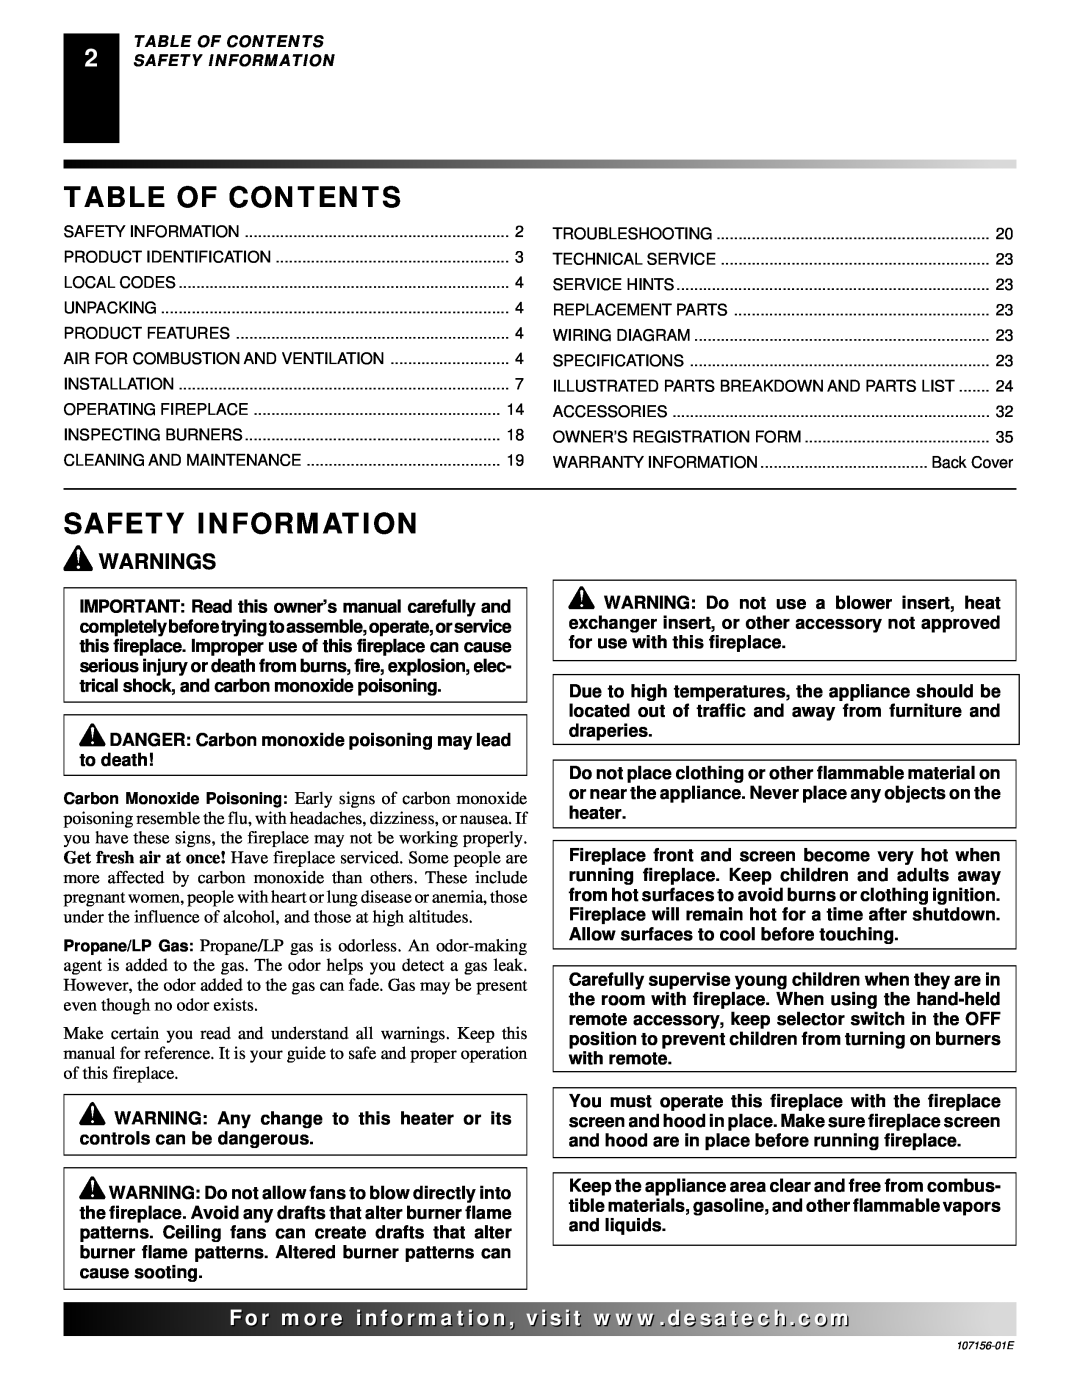 Vanguard Heating 107156-01E.pdf installation manual Table Of Contents, Safety Information, Warnings 